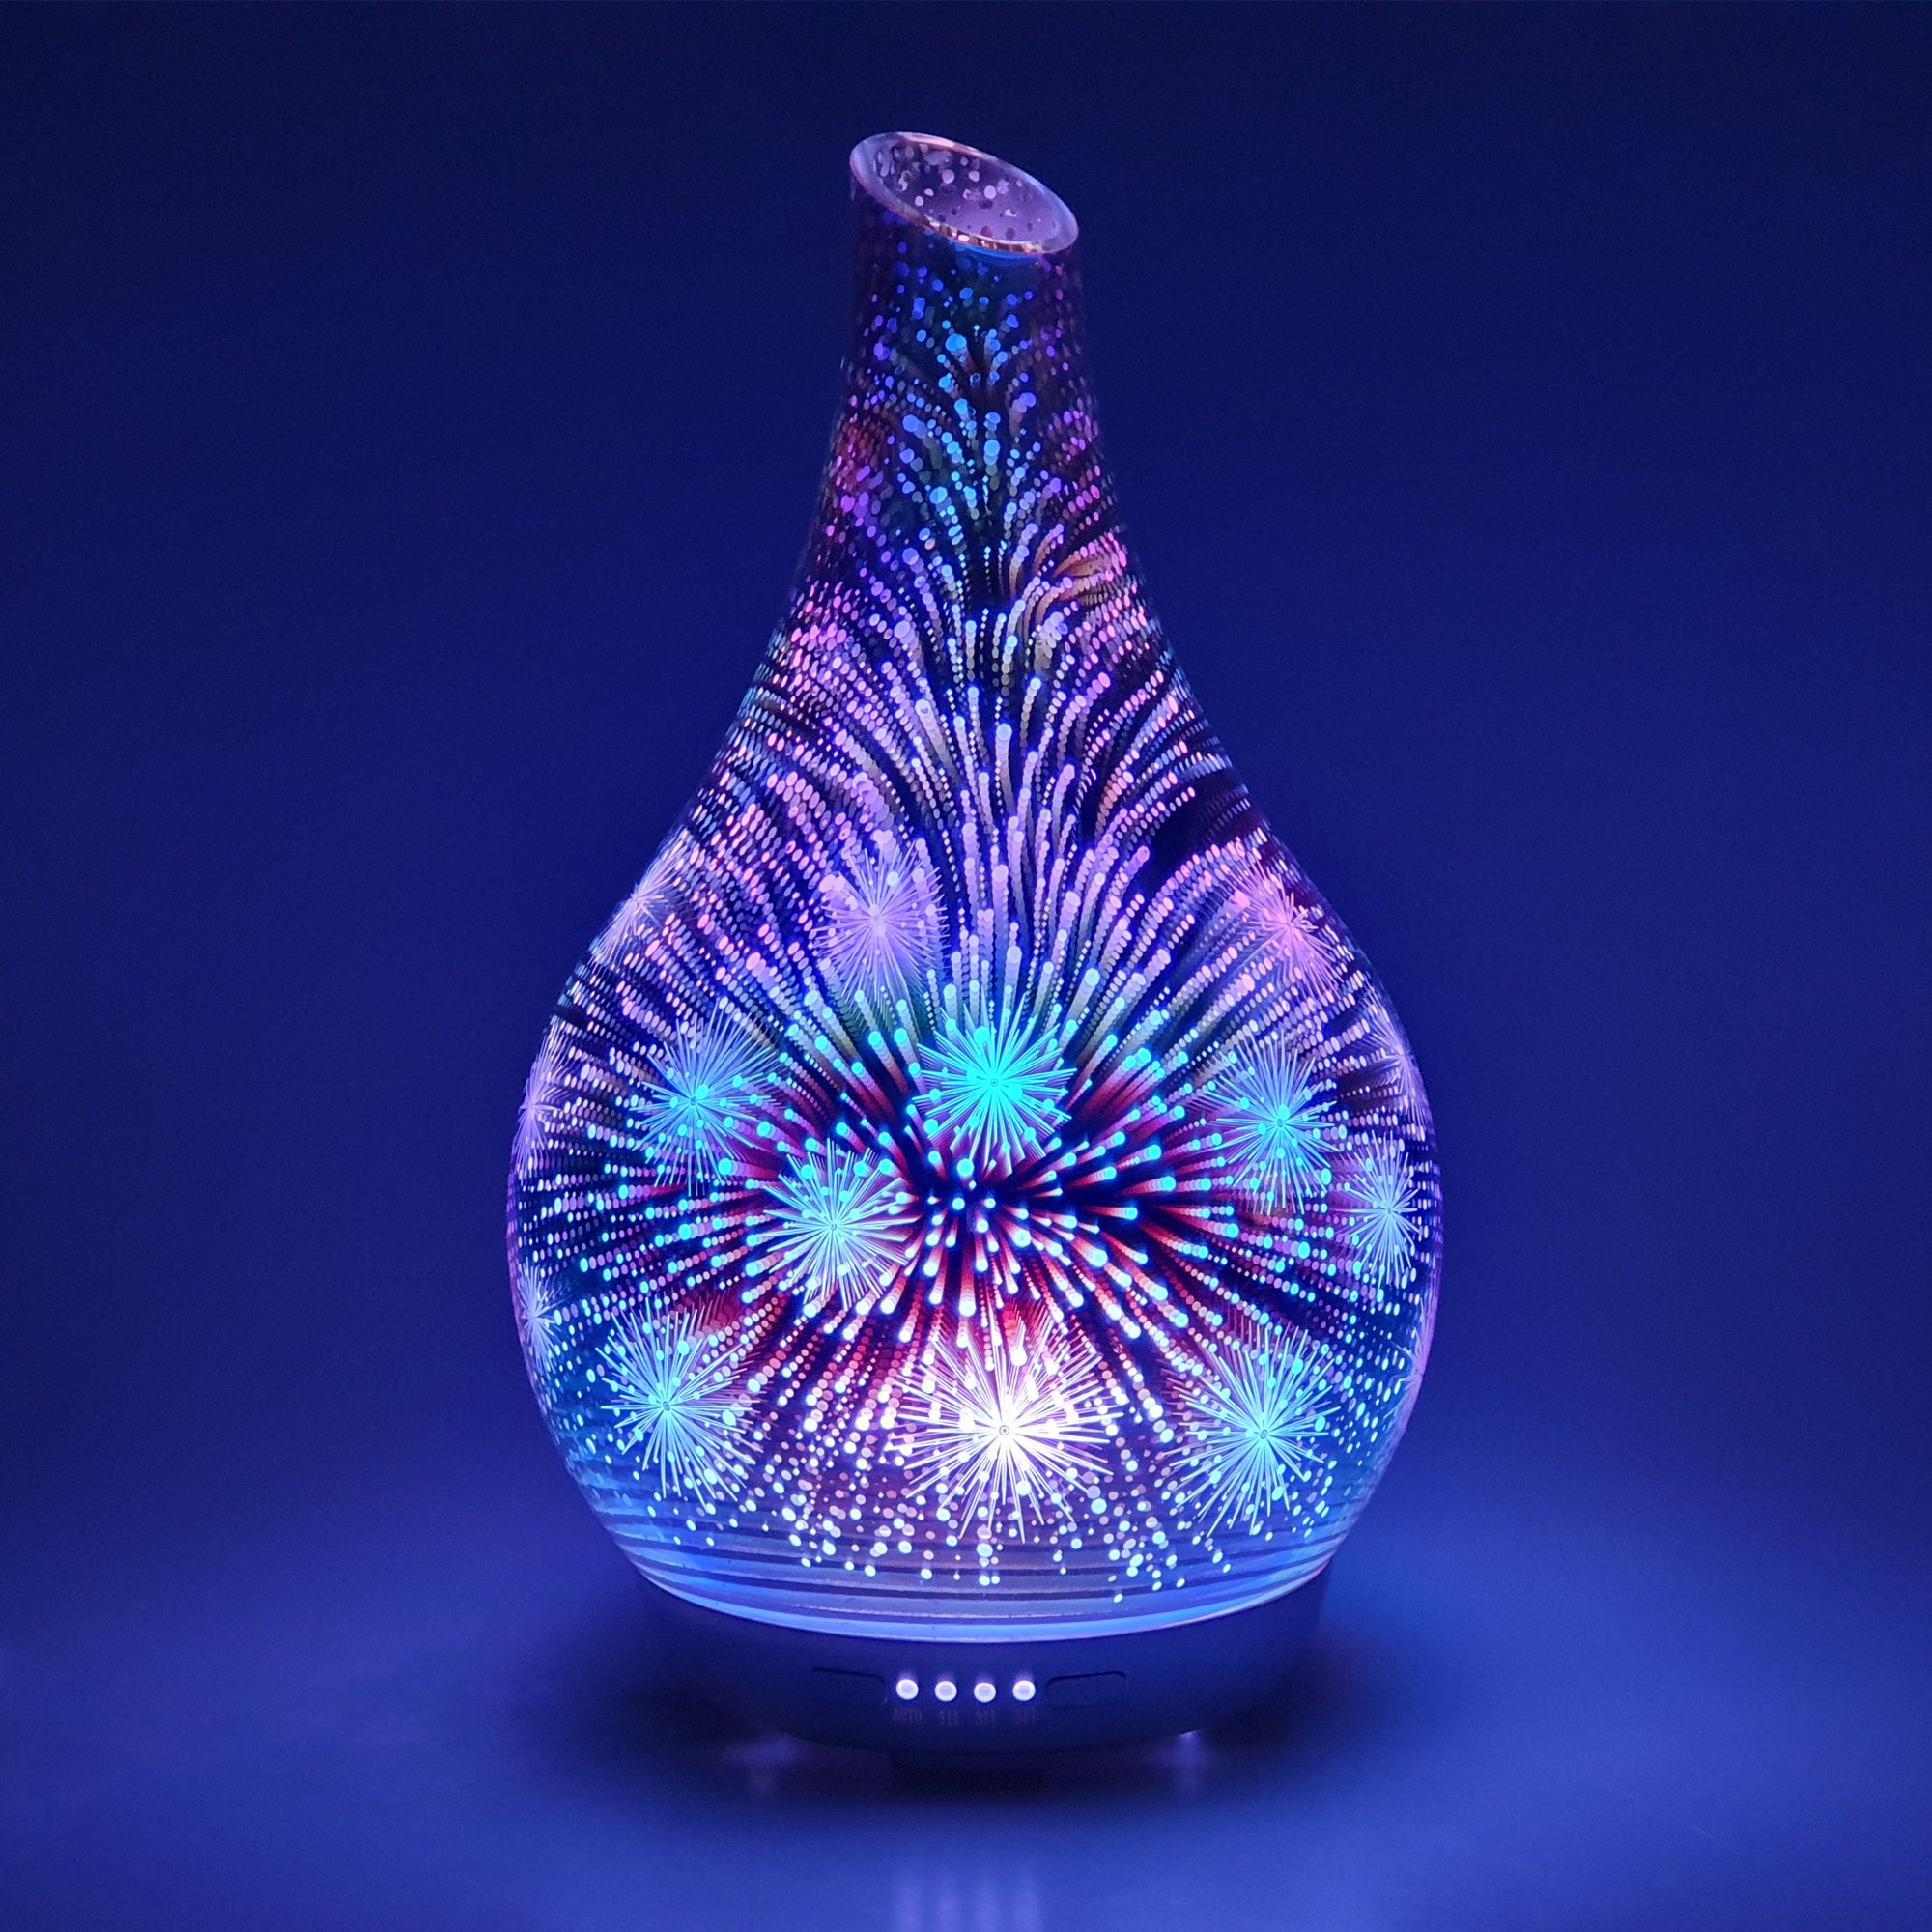 This large Oil Diffuser is perfect not only for fireworks night, but for every occasion and celebration, because who doesn'tt love some fireworks all year round.